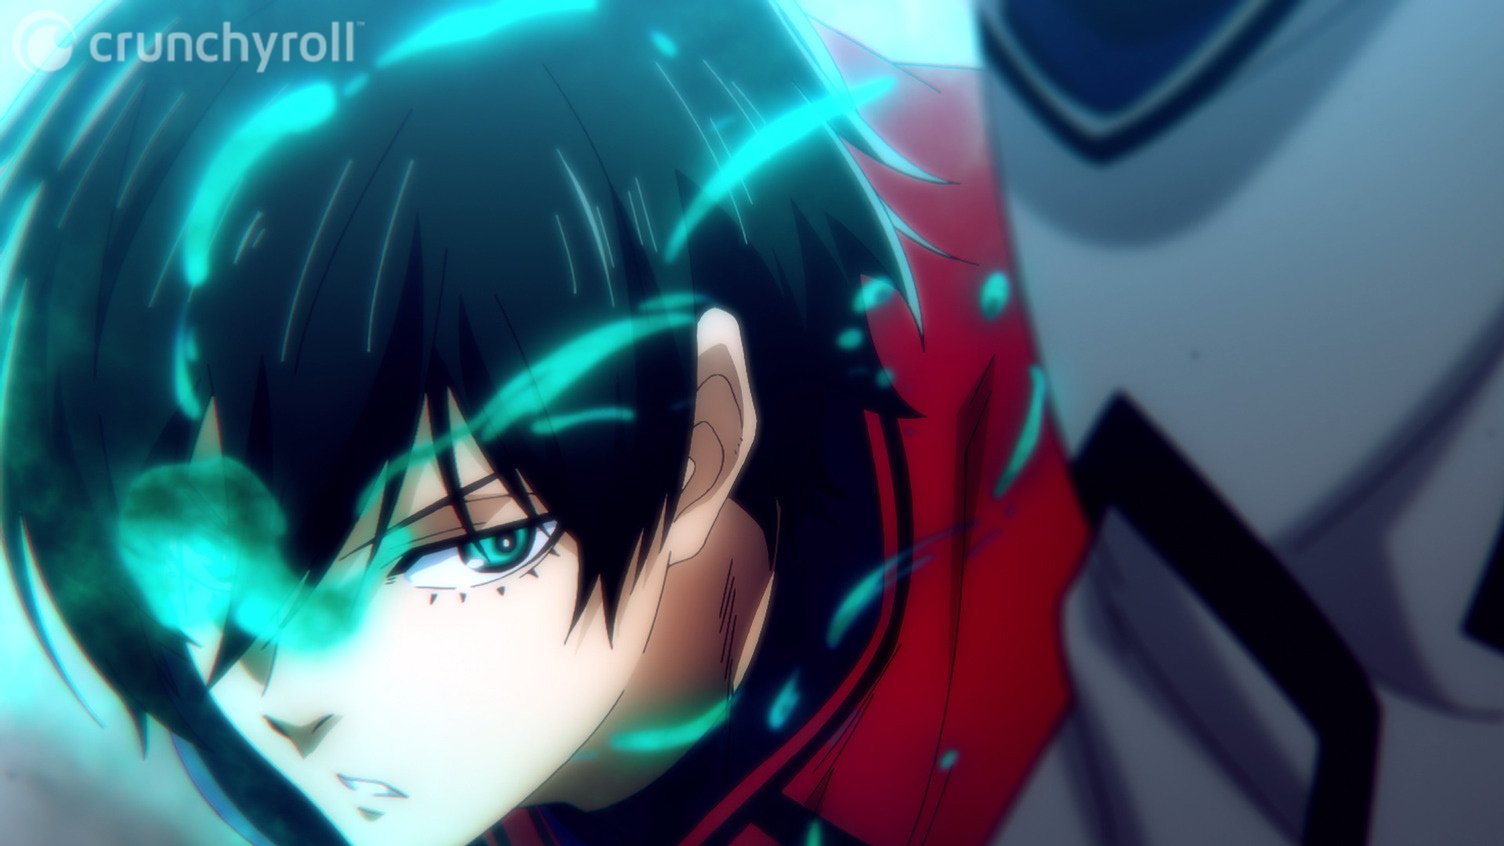 Blue Lock' review: Season one sets a high bar for sports anime, Entertainment